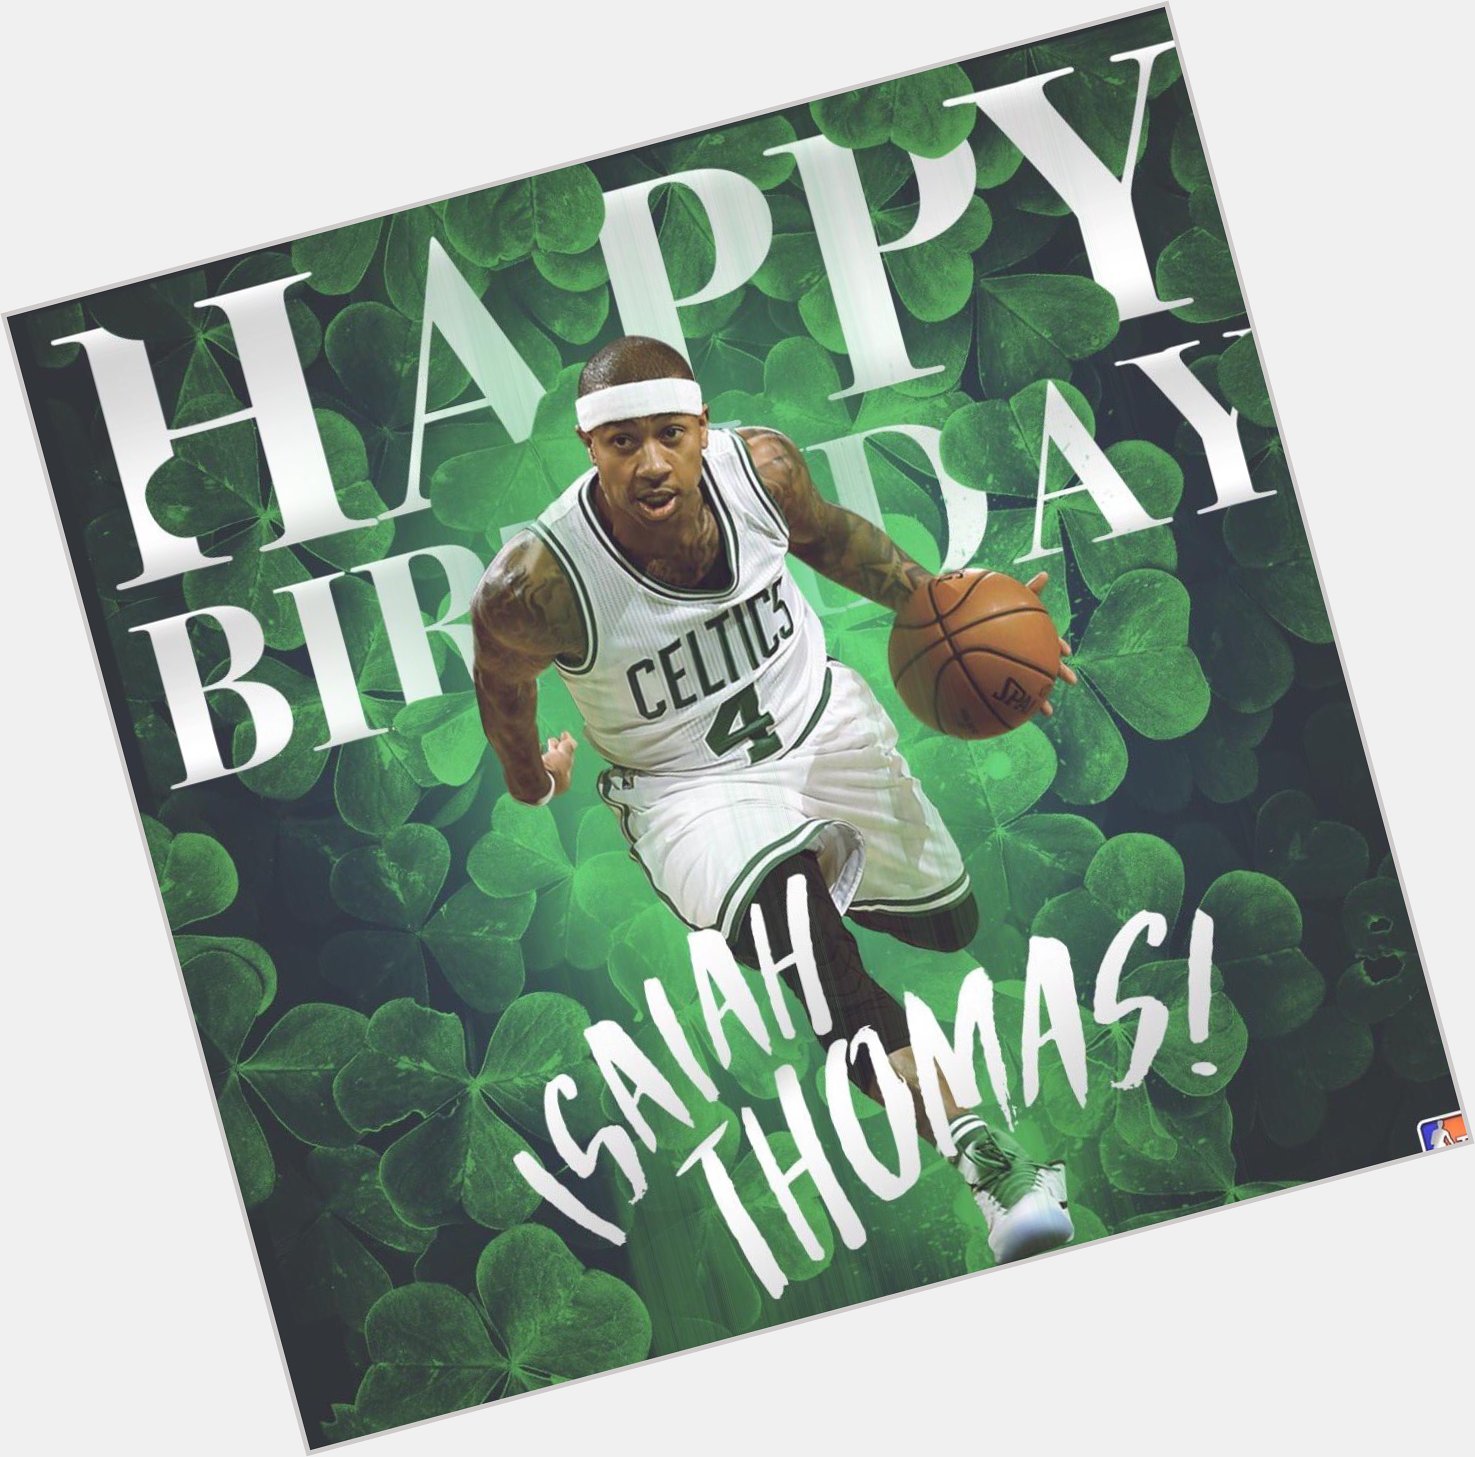 Happy birthday to One of Point guards in the NBA Isaiah Thomas 